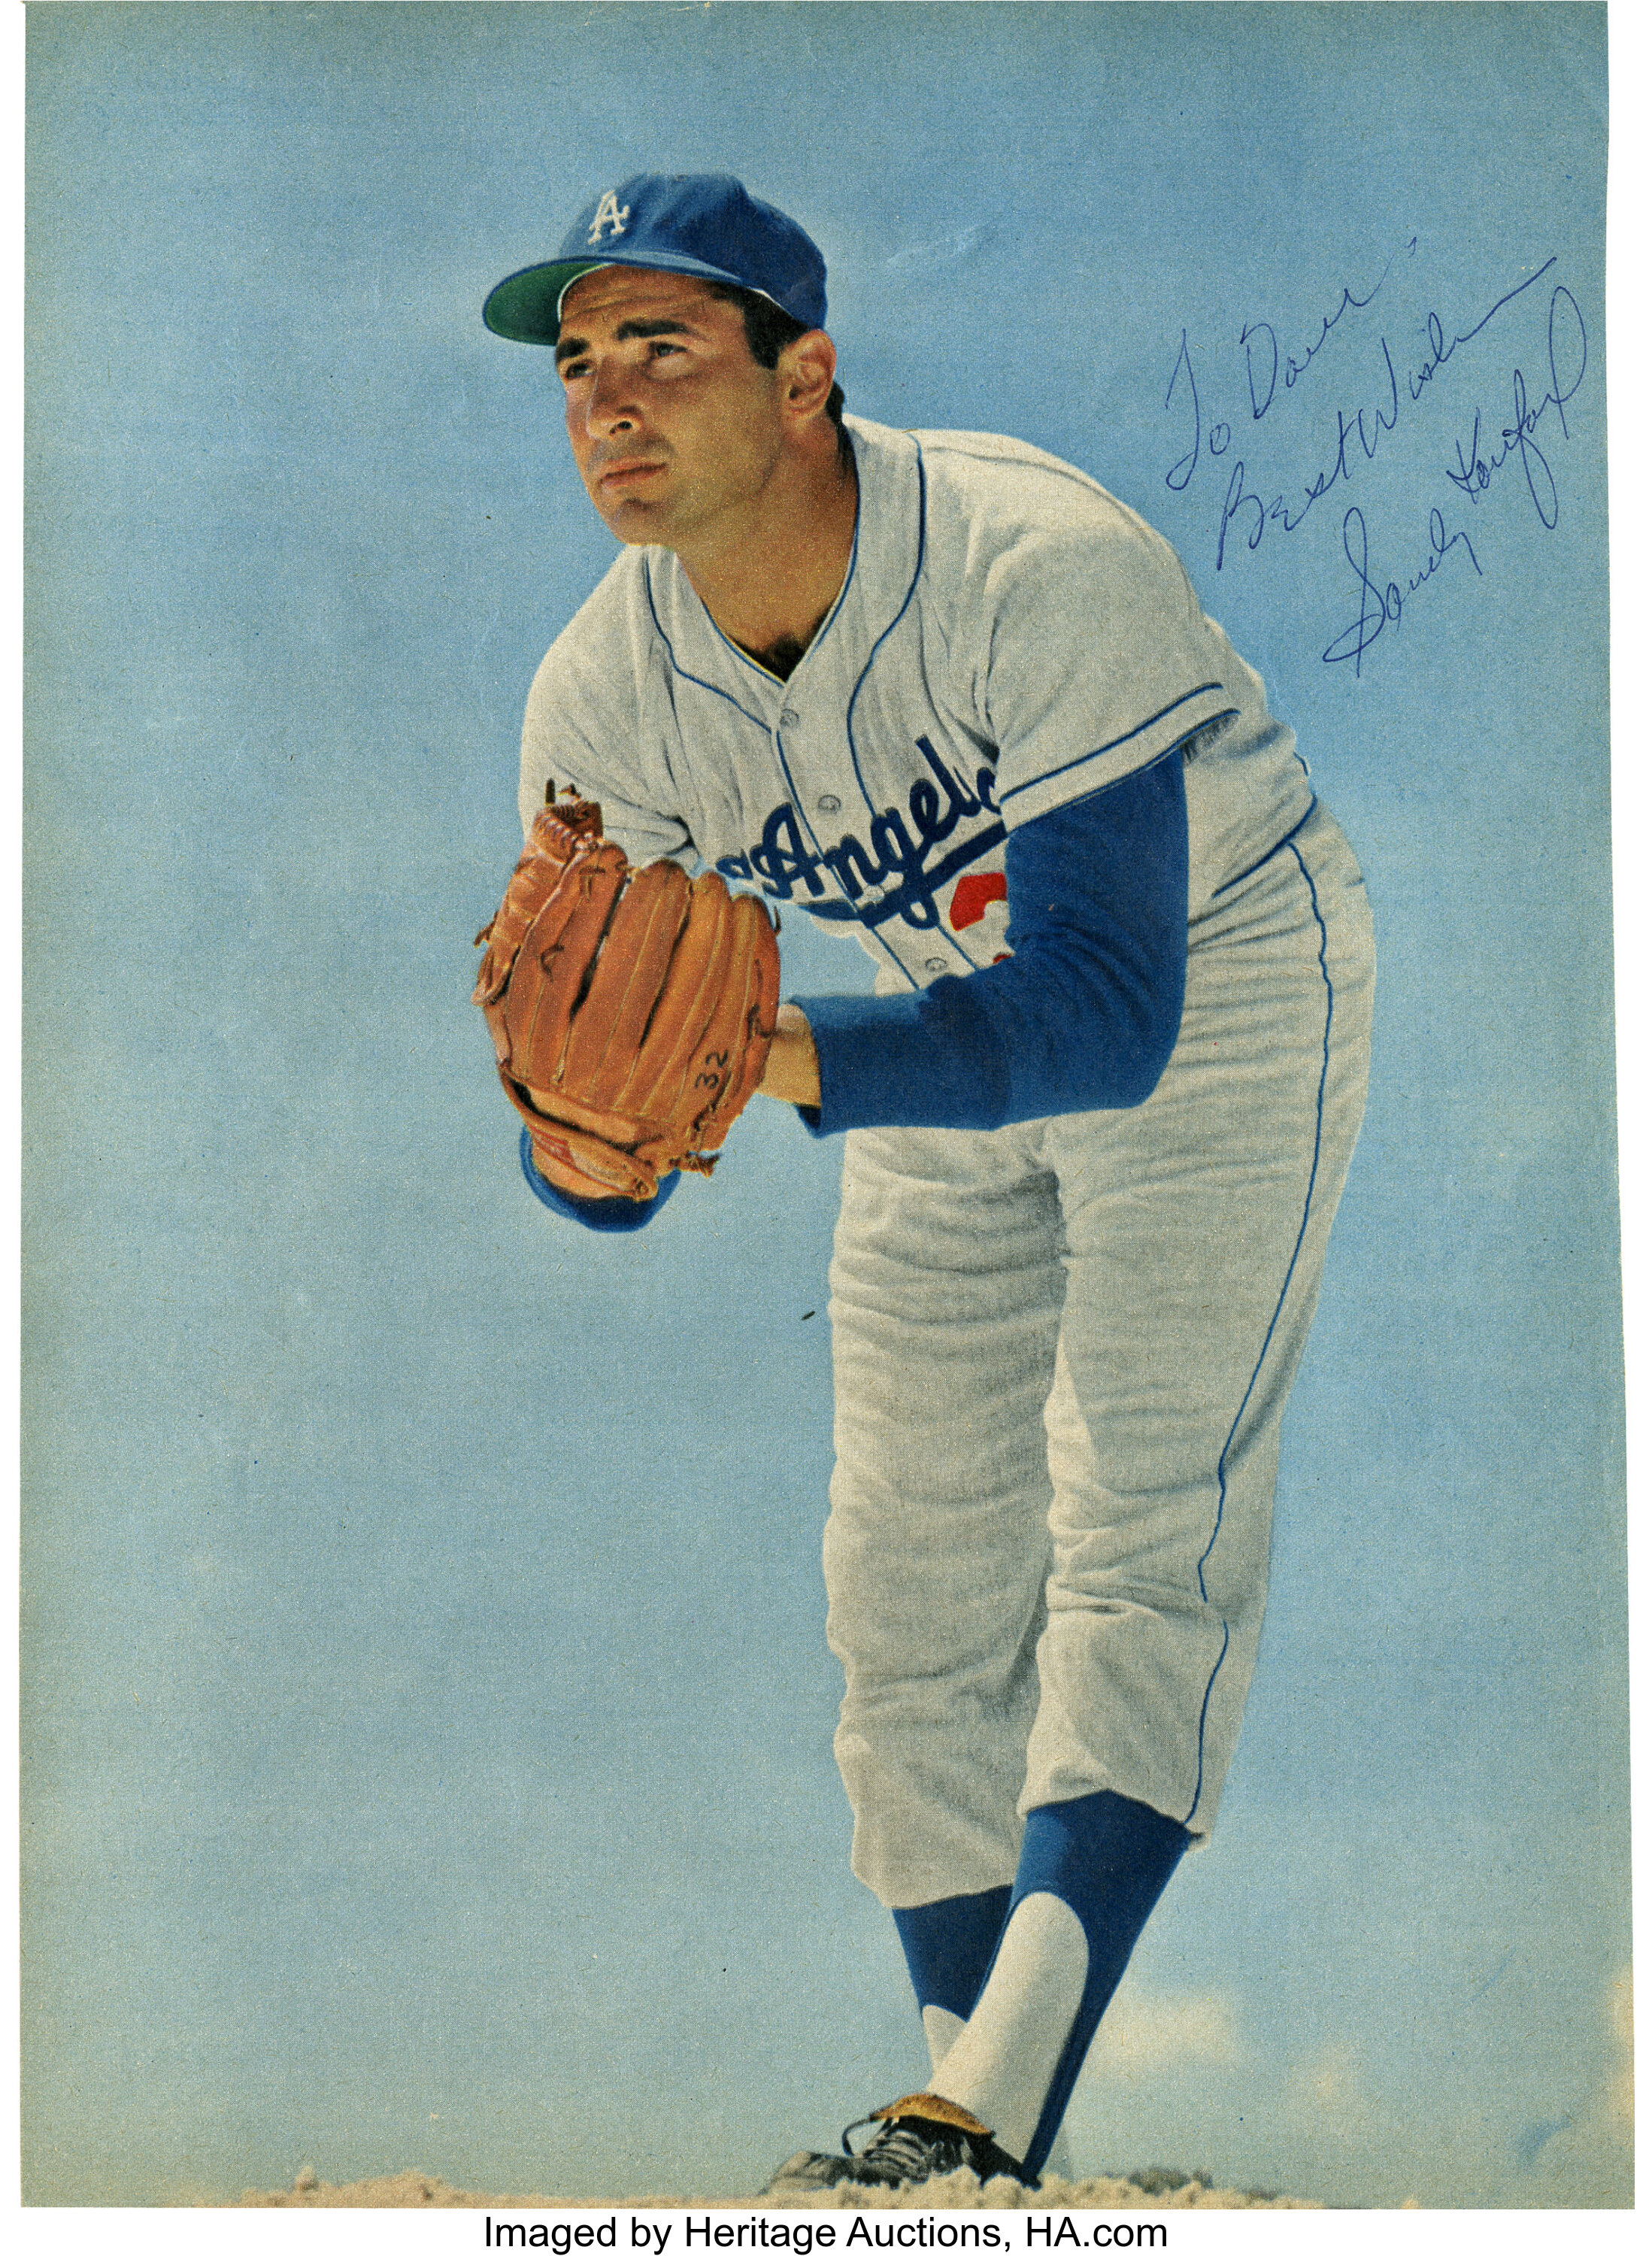 Sold at Auction: Sandy Koufax MLB Baseball SIGNED Autograph & Photo